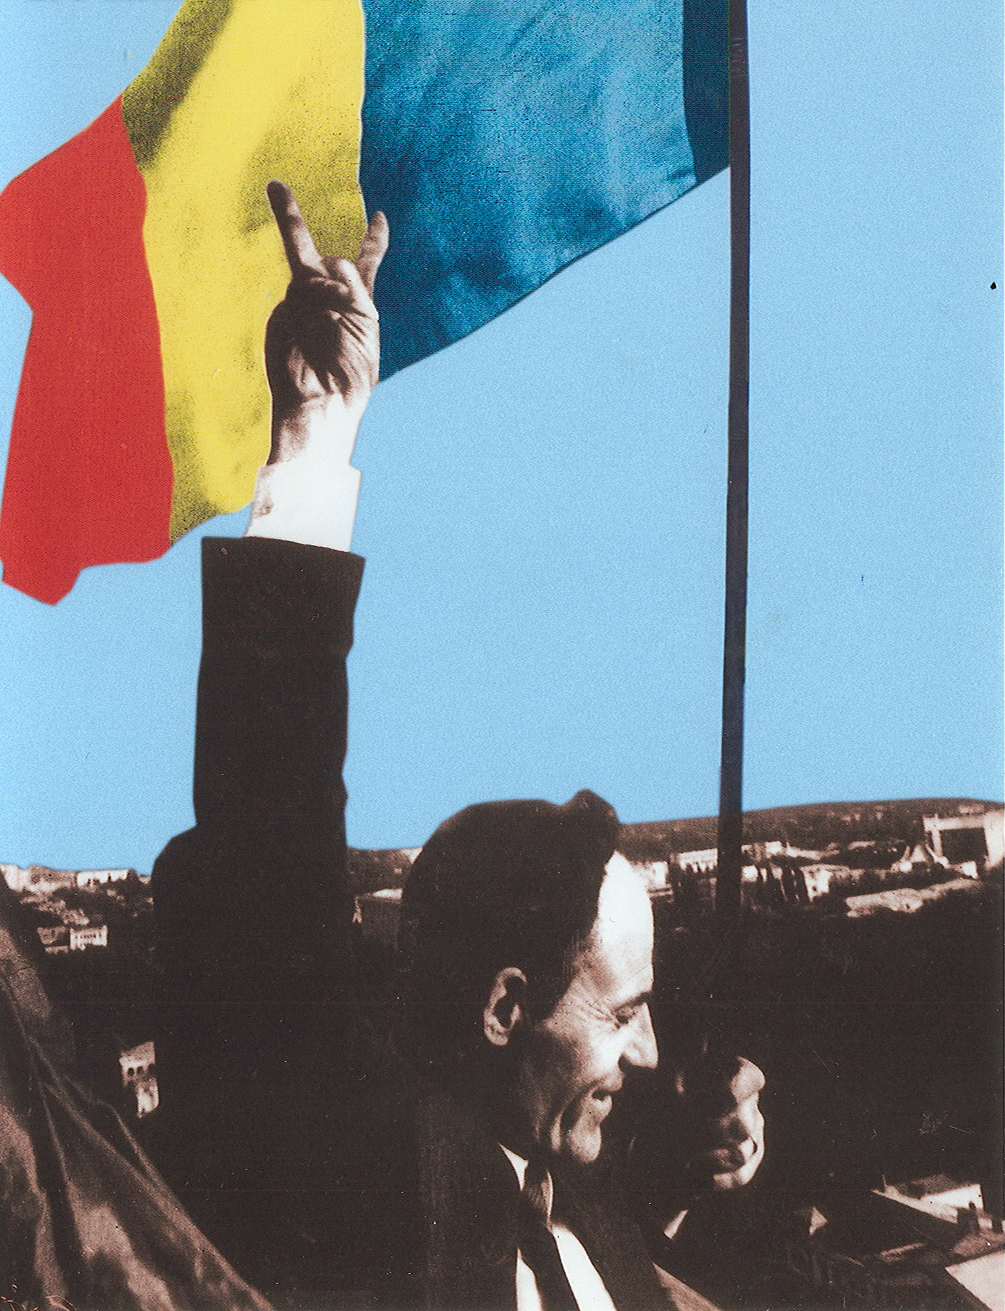 Gheorghe Ghimpu replaces the Soviet flag over the Moldovan Parliament with the Romanian one on April 27, 1990.